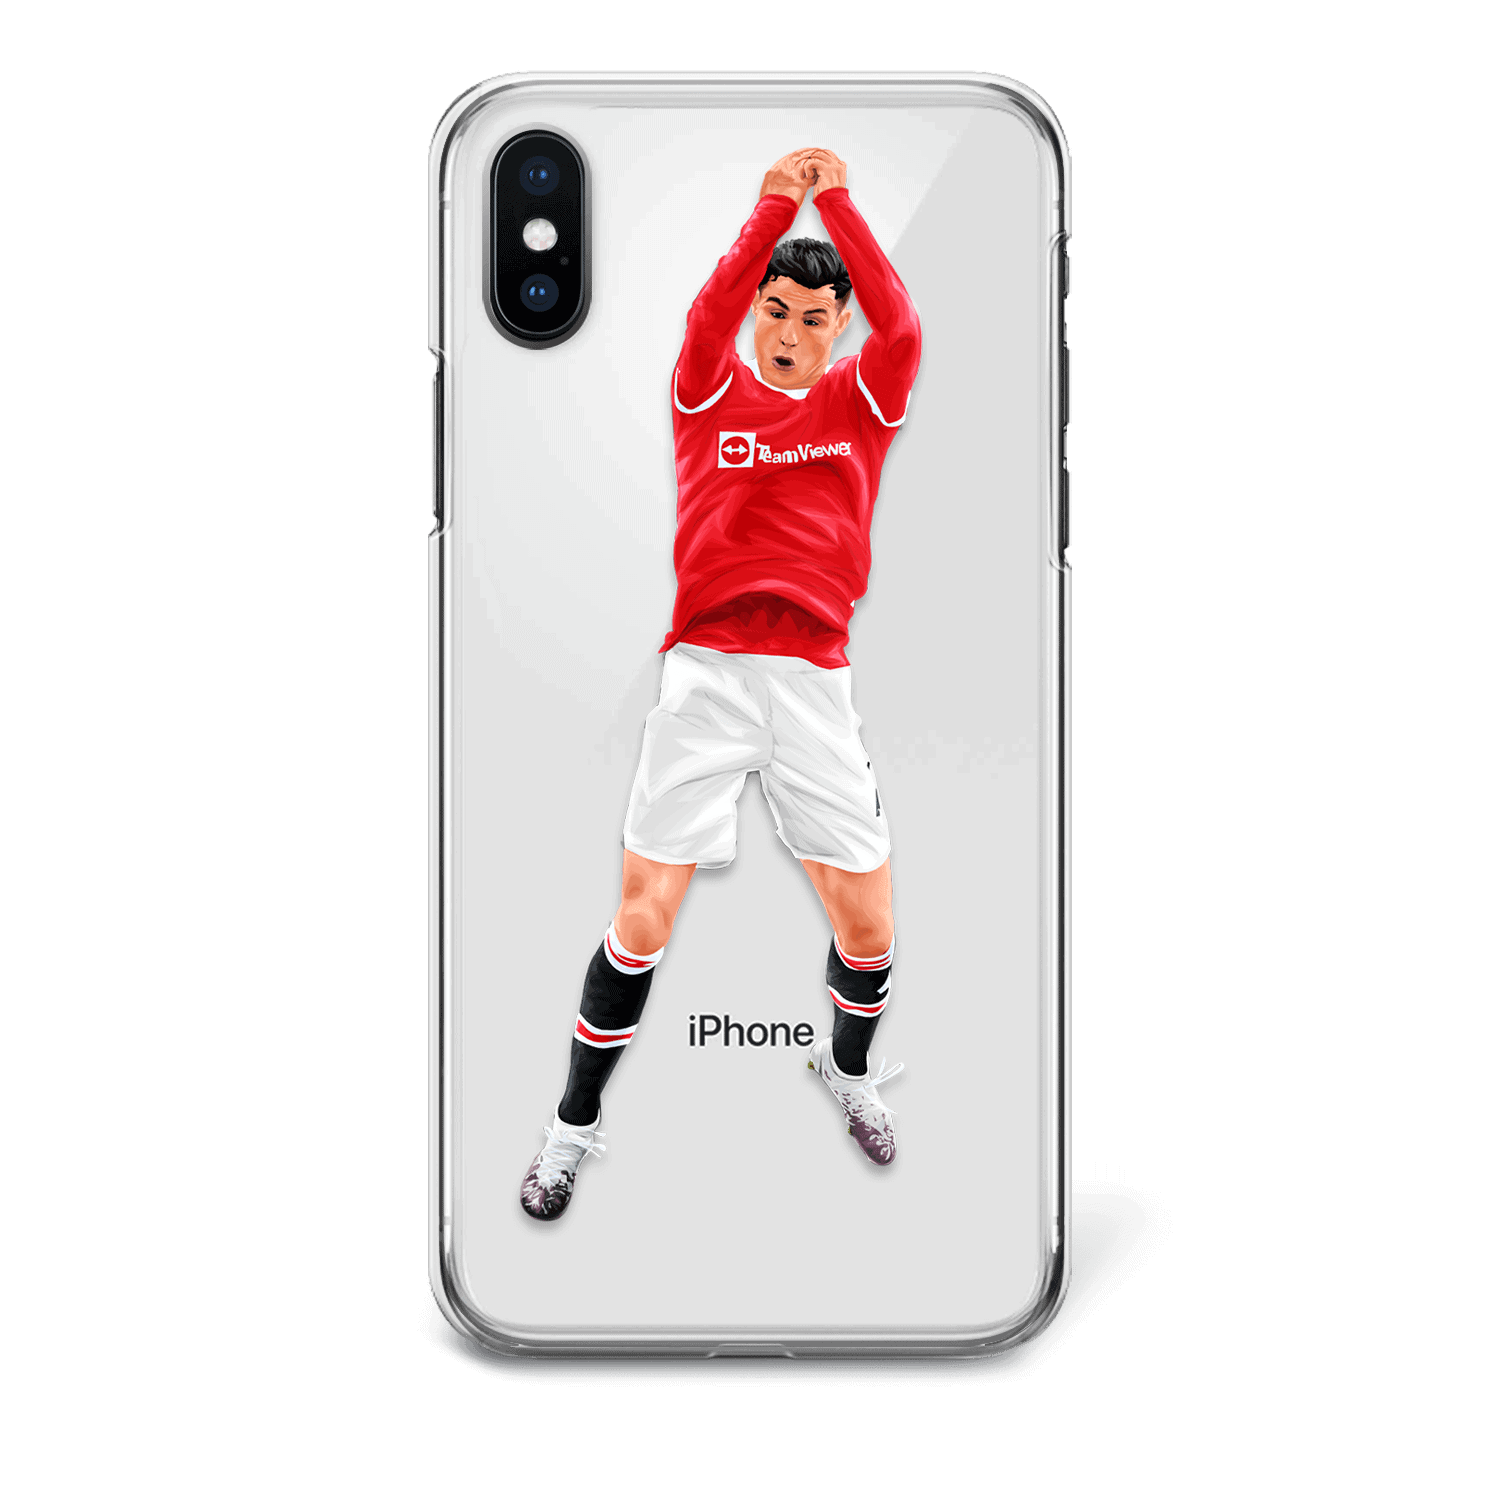 Cristiano Is Back at Old Trafford phone case